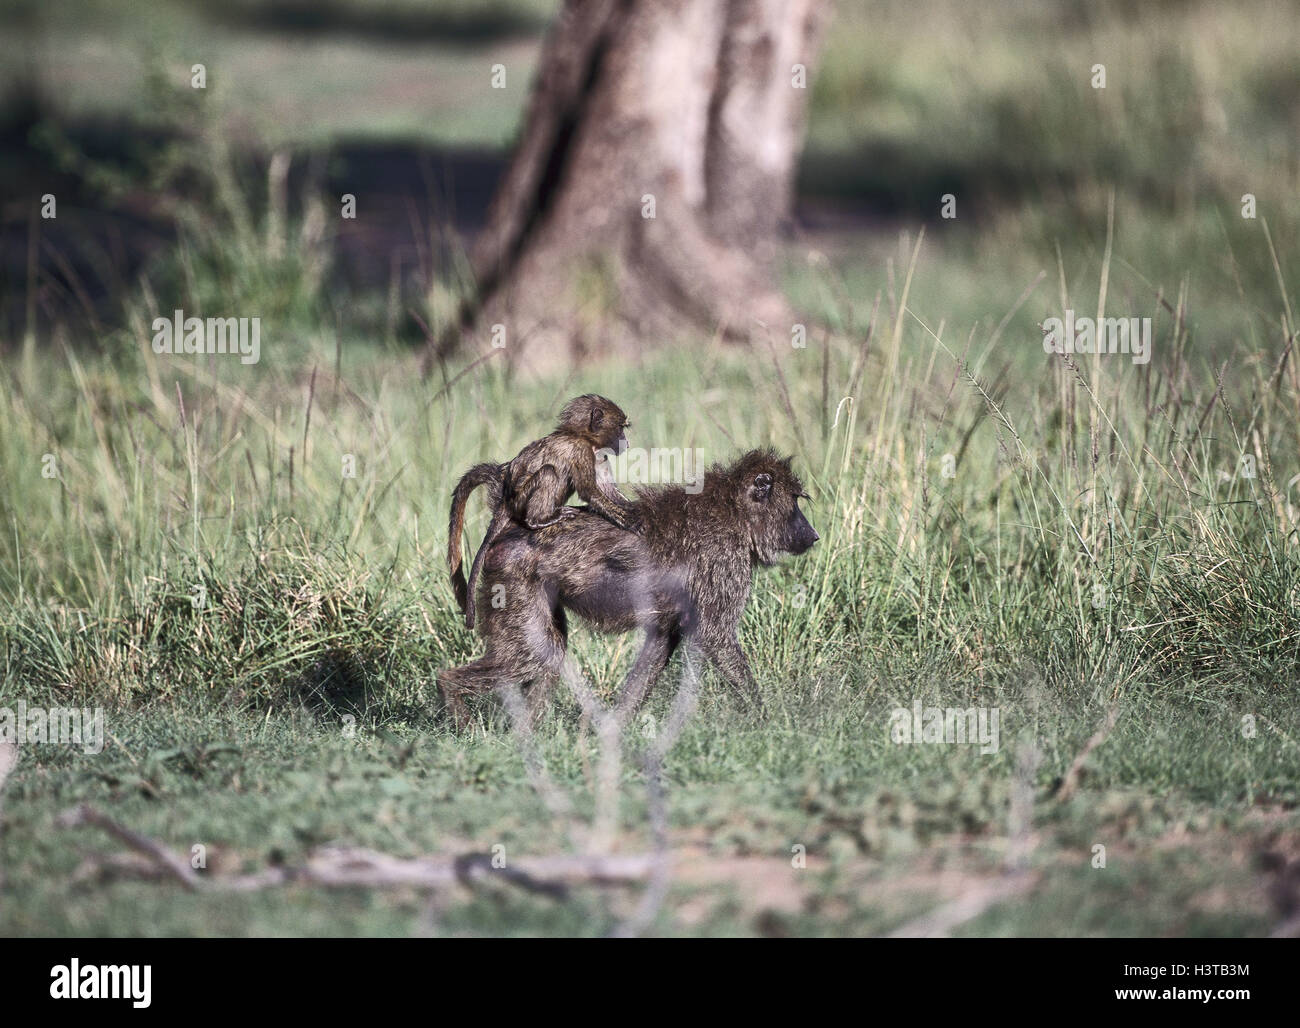 Anubispaviane, Papio anubis, females, young animal, pickaback, Africa, mammals, wild animals, primates, Old world monkeys, Catarrhini, dog monkeys, Cercopithecoidea, steppe baboons, green baboons, mother animal, young, carry, backs, preview, meadow Stock Photo